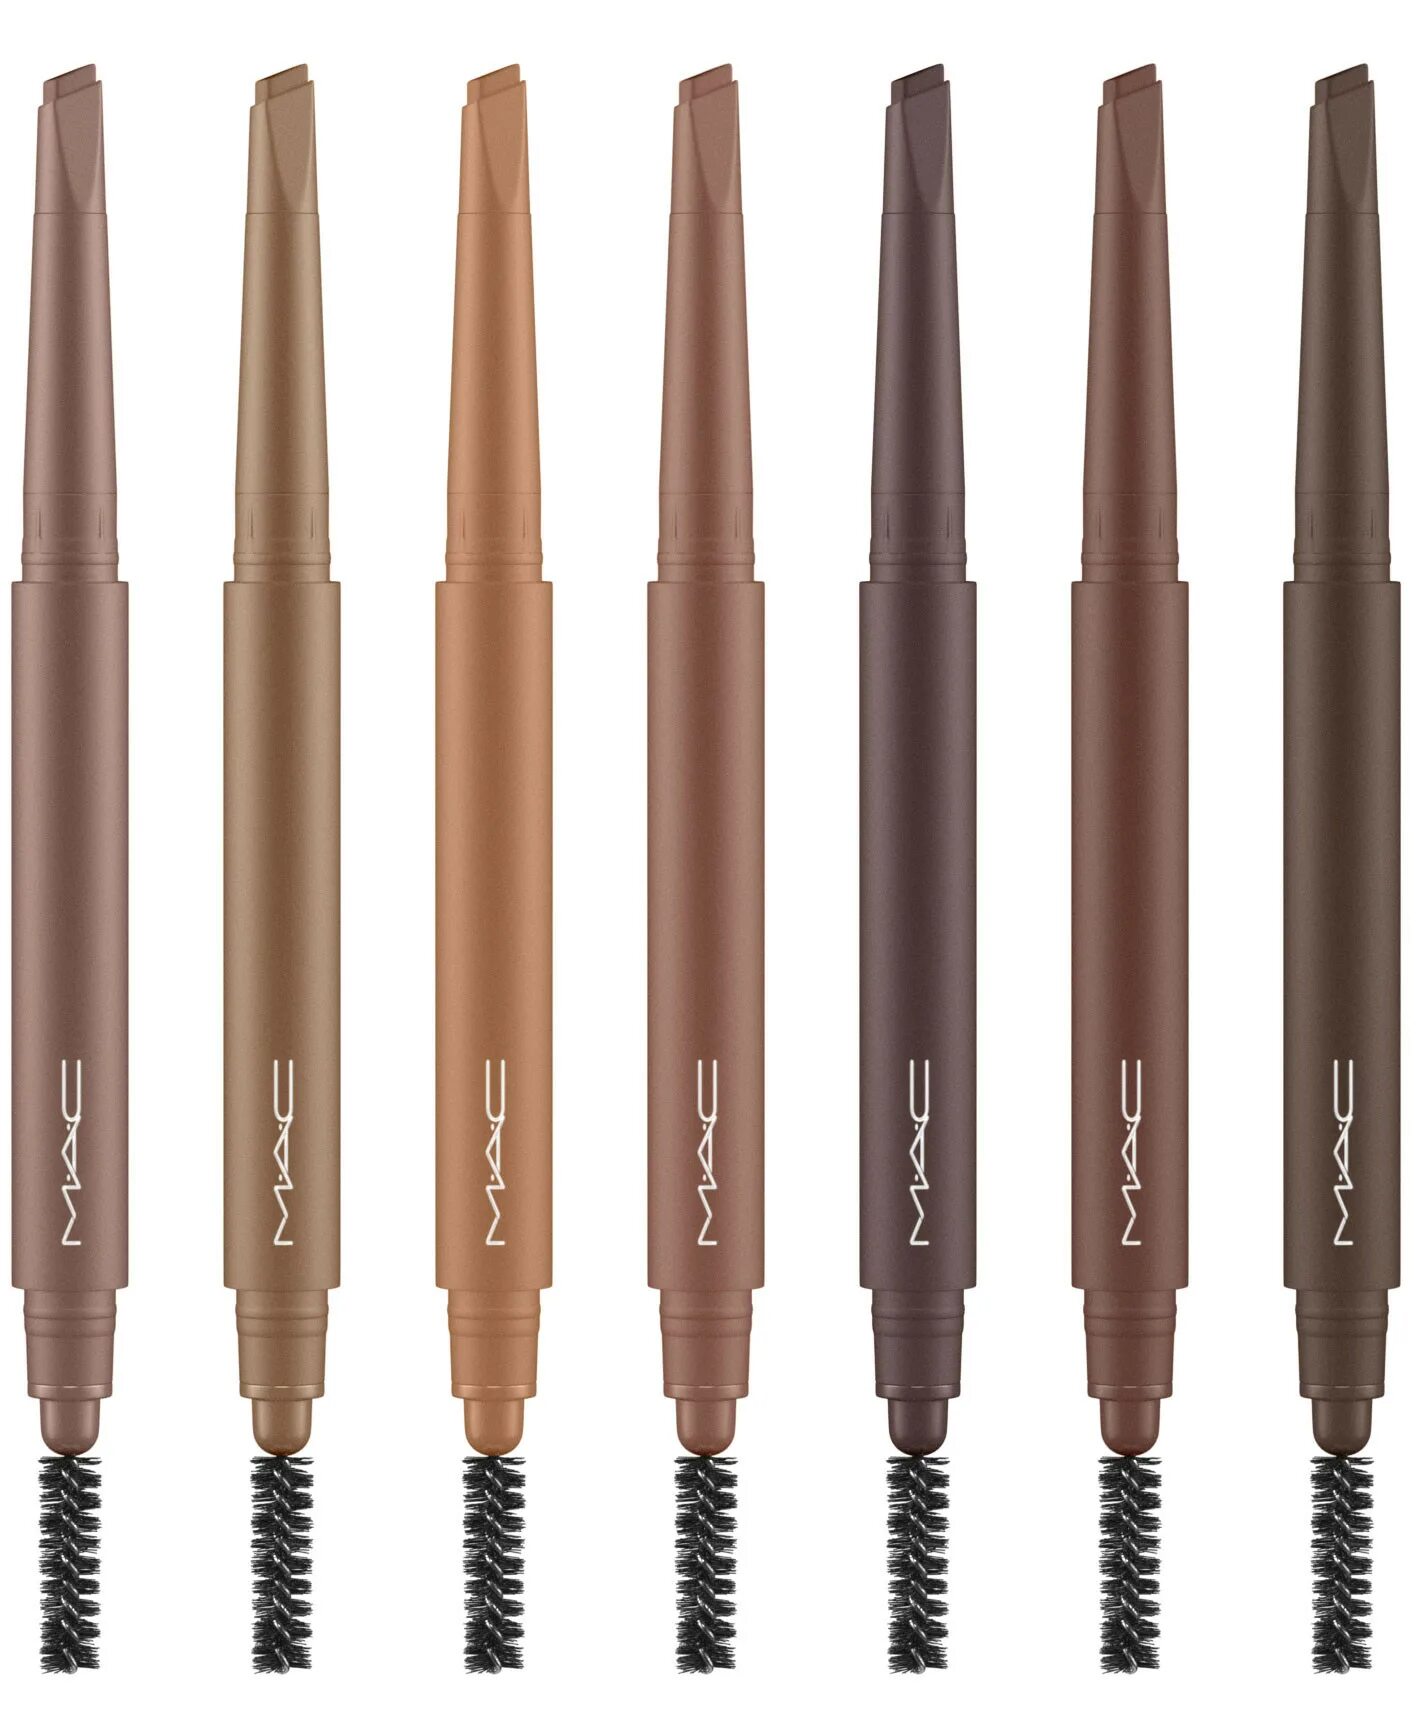 Taupe Veluxe Brow Liner карандаш Mac. Карандаш Mac Eyebrow Pencil. Mac карандаш для бровей Veluxe Brow Taupe. Mac Veluxe Brow Liner палитра. Brow sculpt